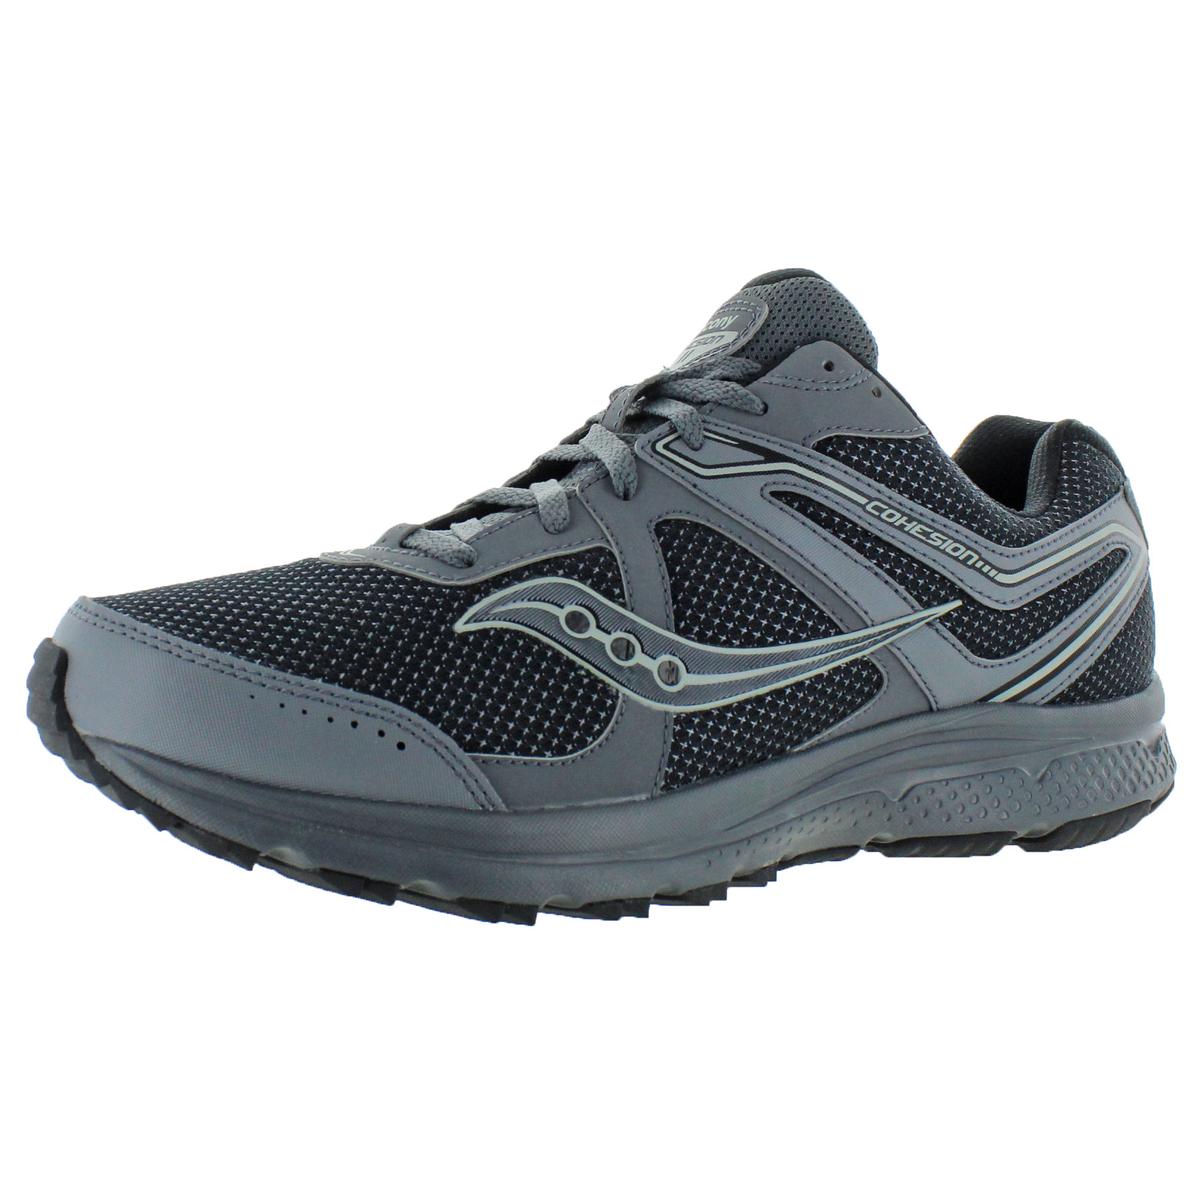 Grid Cohesion Tr11 Mens Hiking Trainers Trail Running Shoes